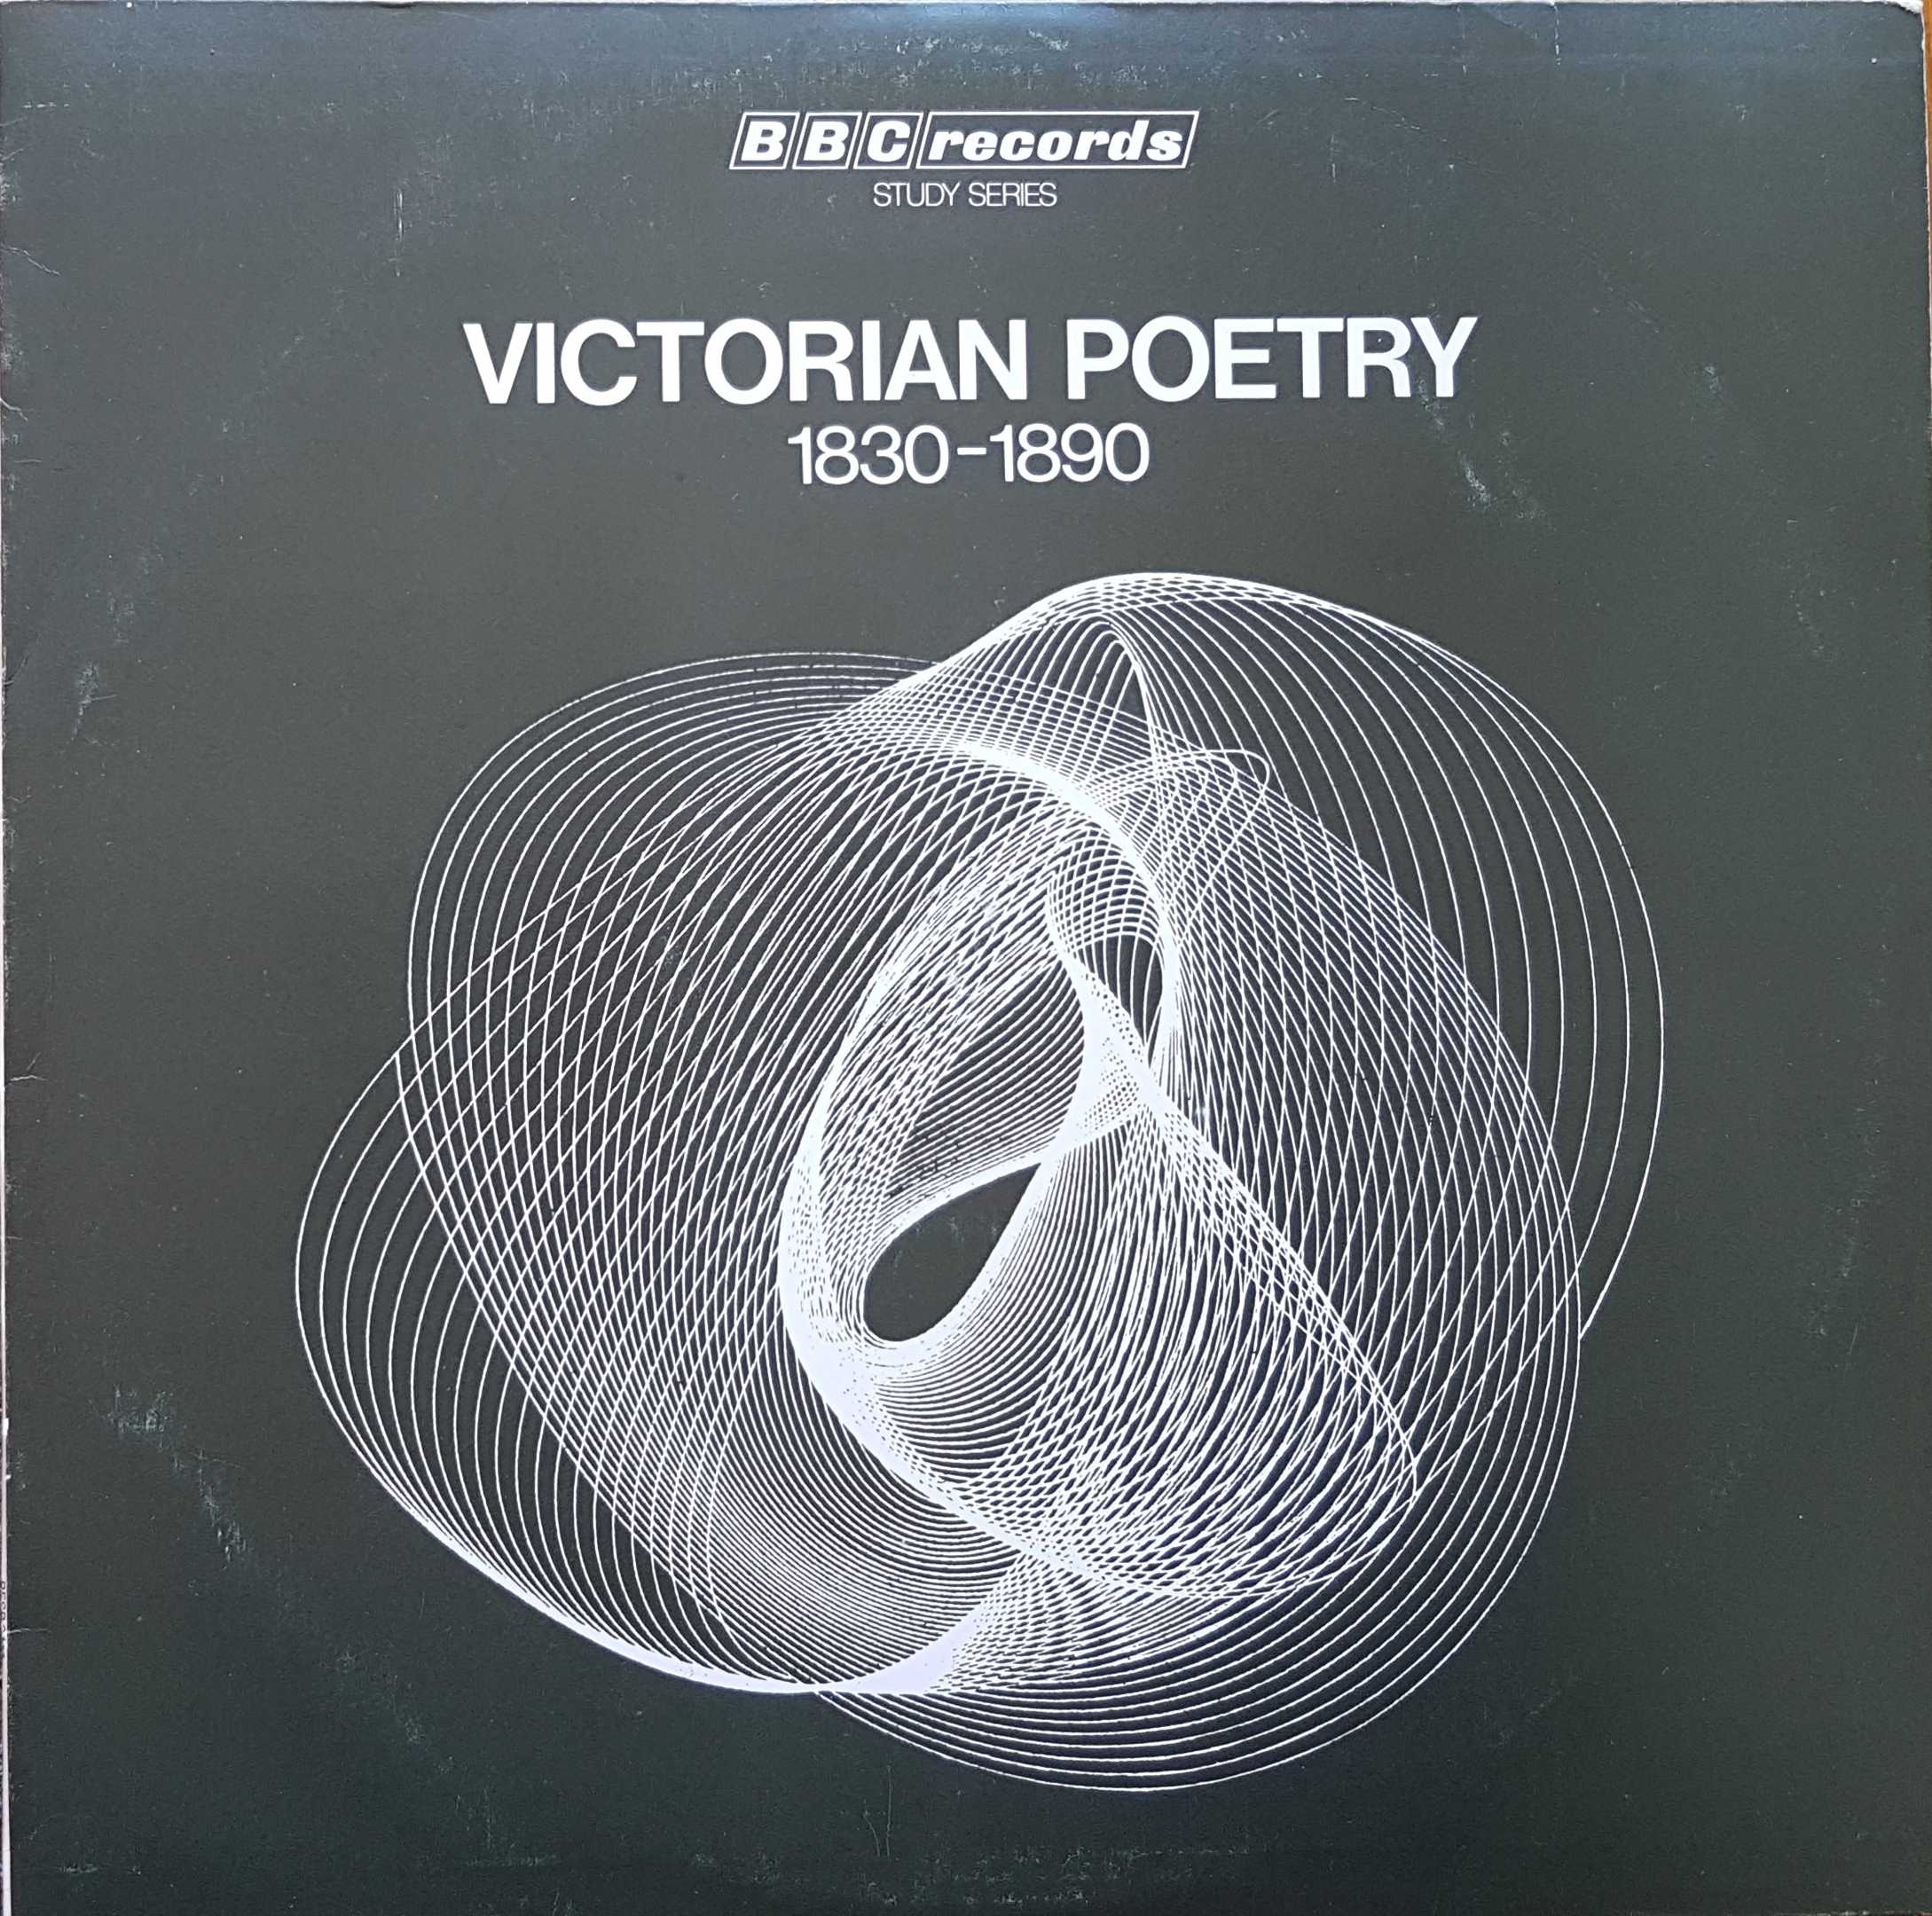 Picture of RESR 21 Victorian poetry 1830-1890 by artist Various from the BBC albums - Records and Tapes library